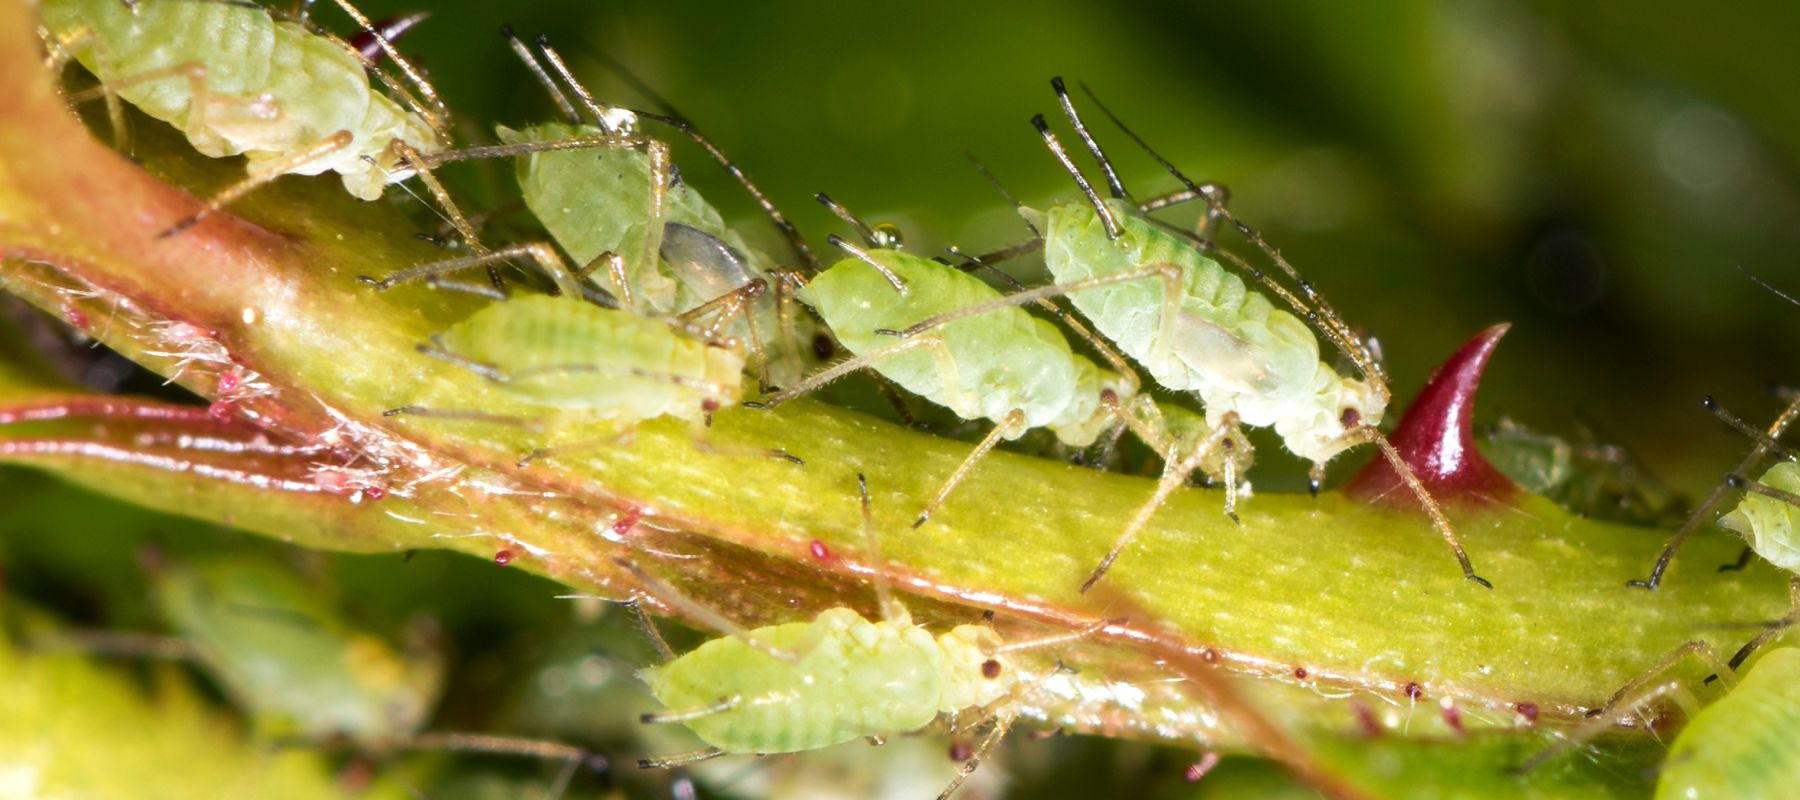 How to get rid of aphids naturally